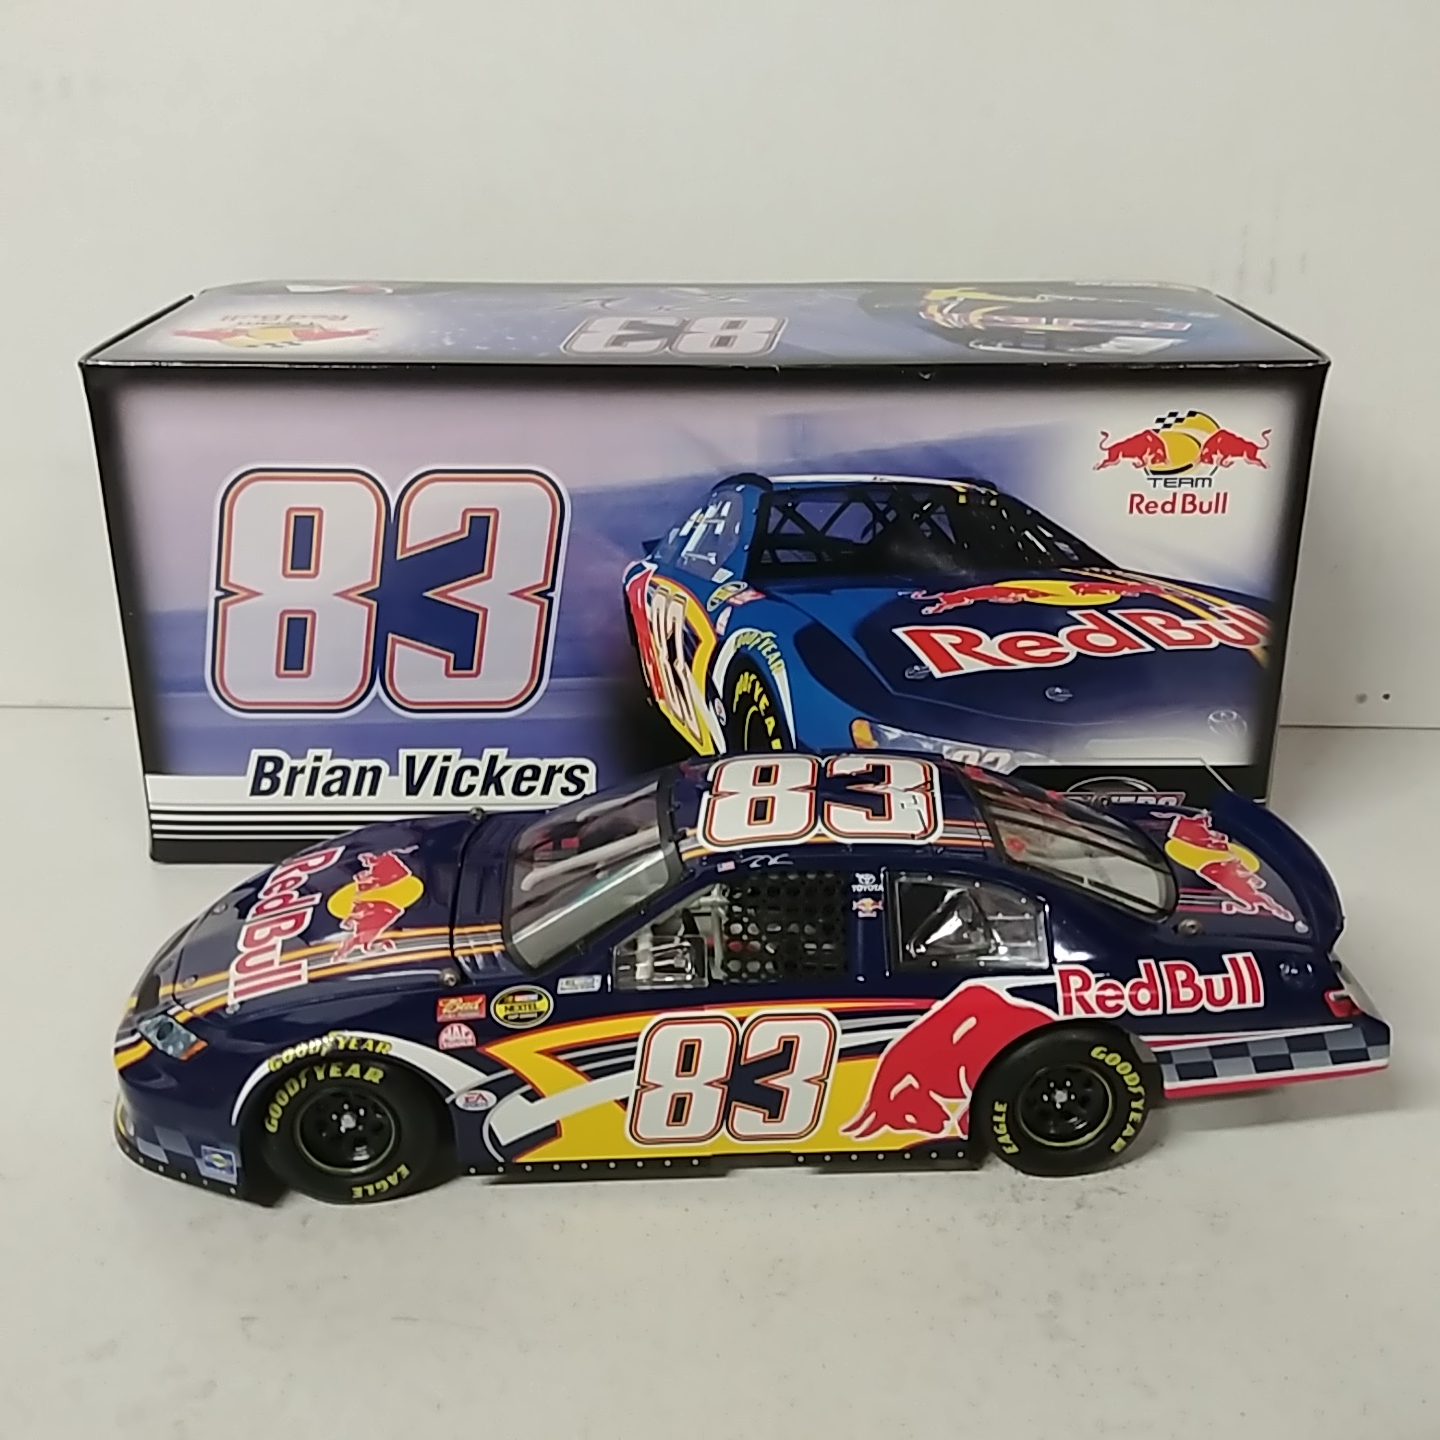 2007 Brian Vickers 1/24th Red Bull Toyota Camry